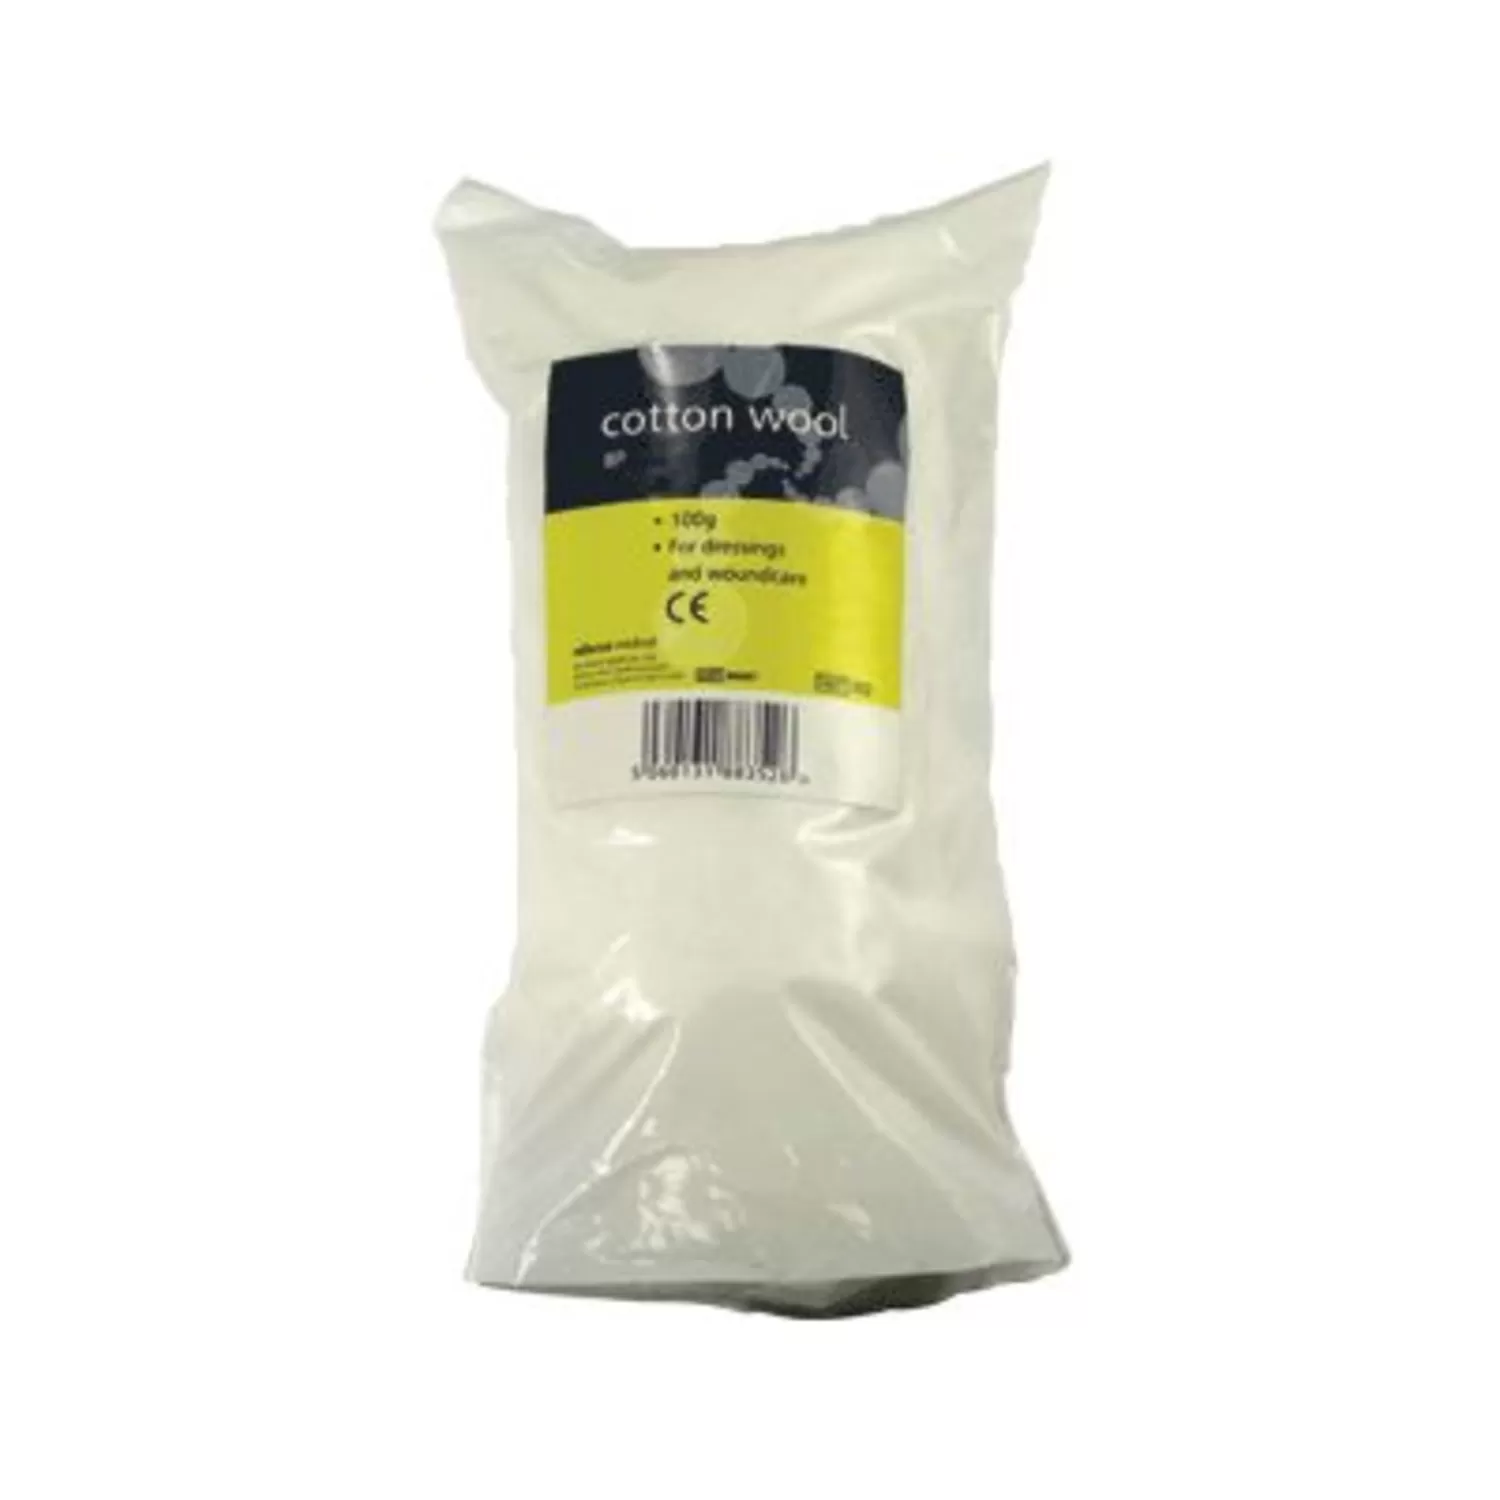 Cotton Wool Roll 100g - Gompels - Care & Nursery Supply Specialists